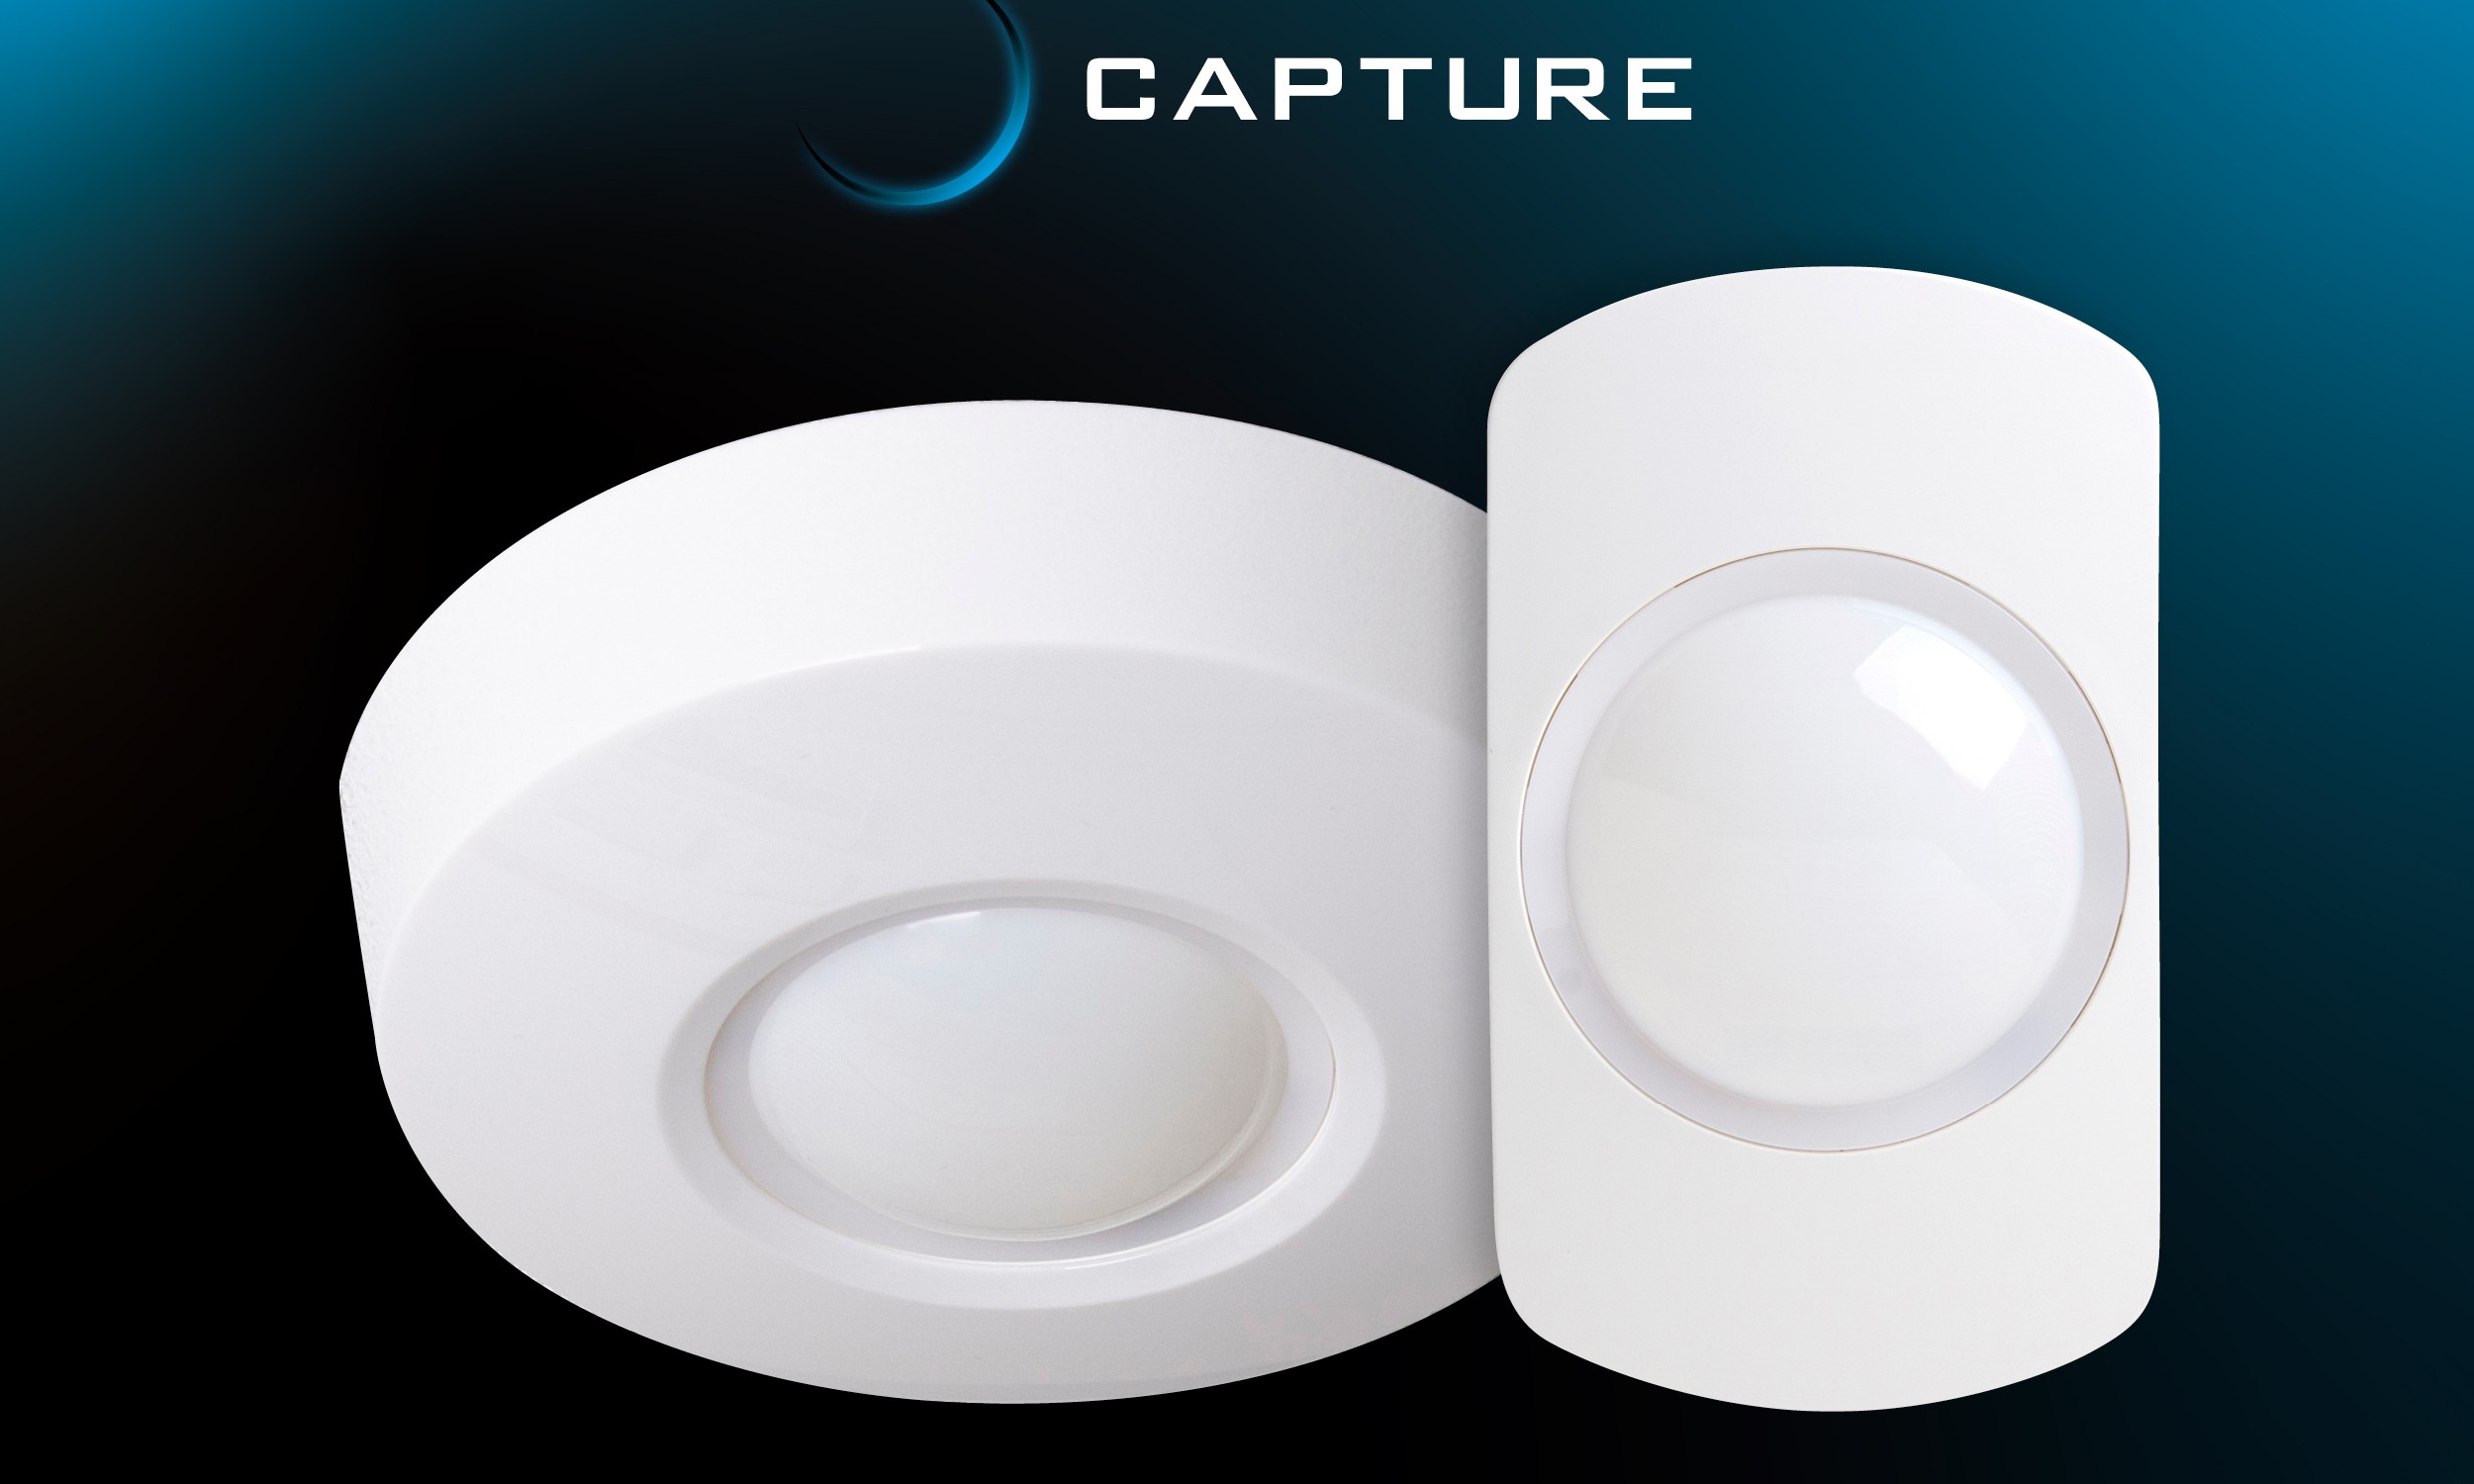 Texecom launches ‘Capture’ security motion detectors in the UK